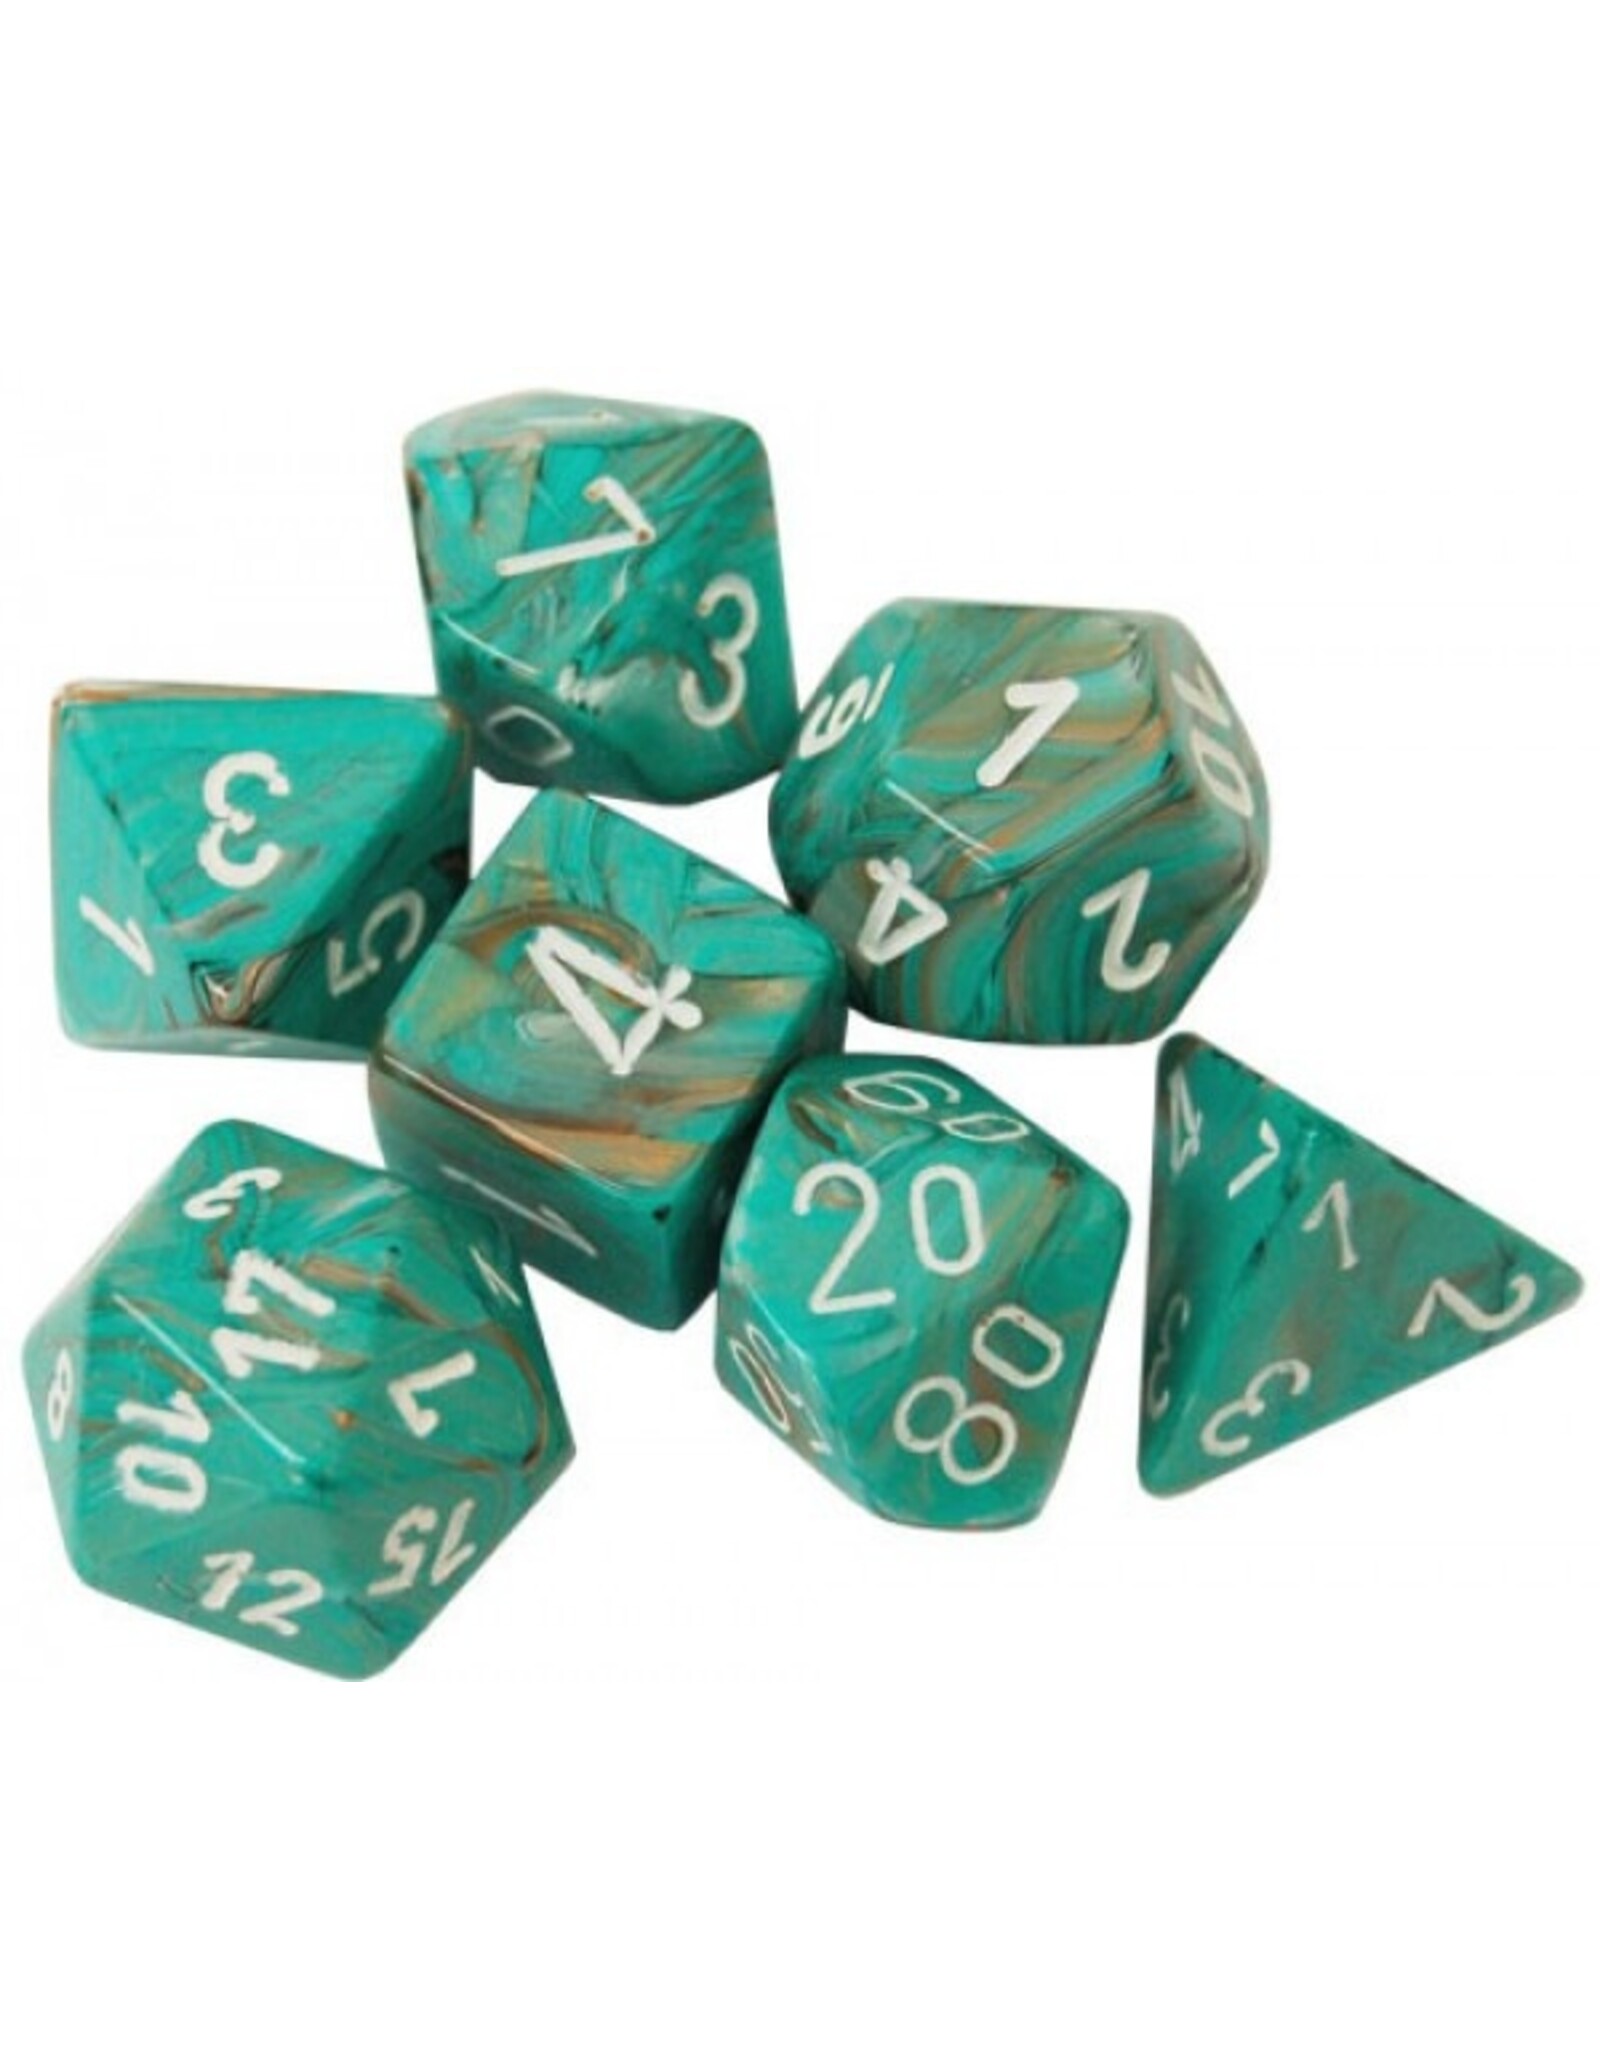 Chessex Dice Menagerie 10: Poly D10 Marble Oxi Copper/White (10)